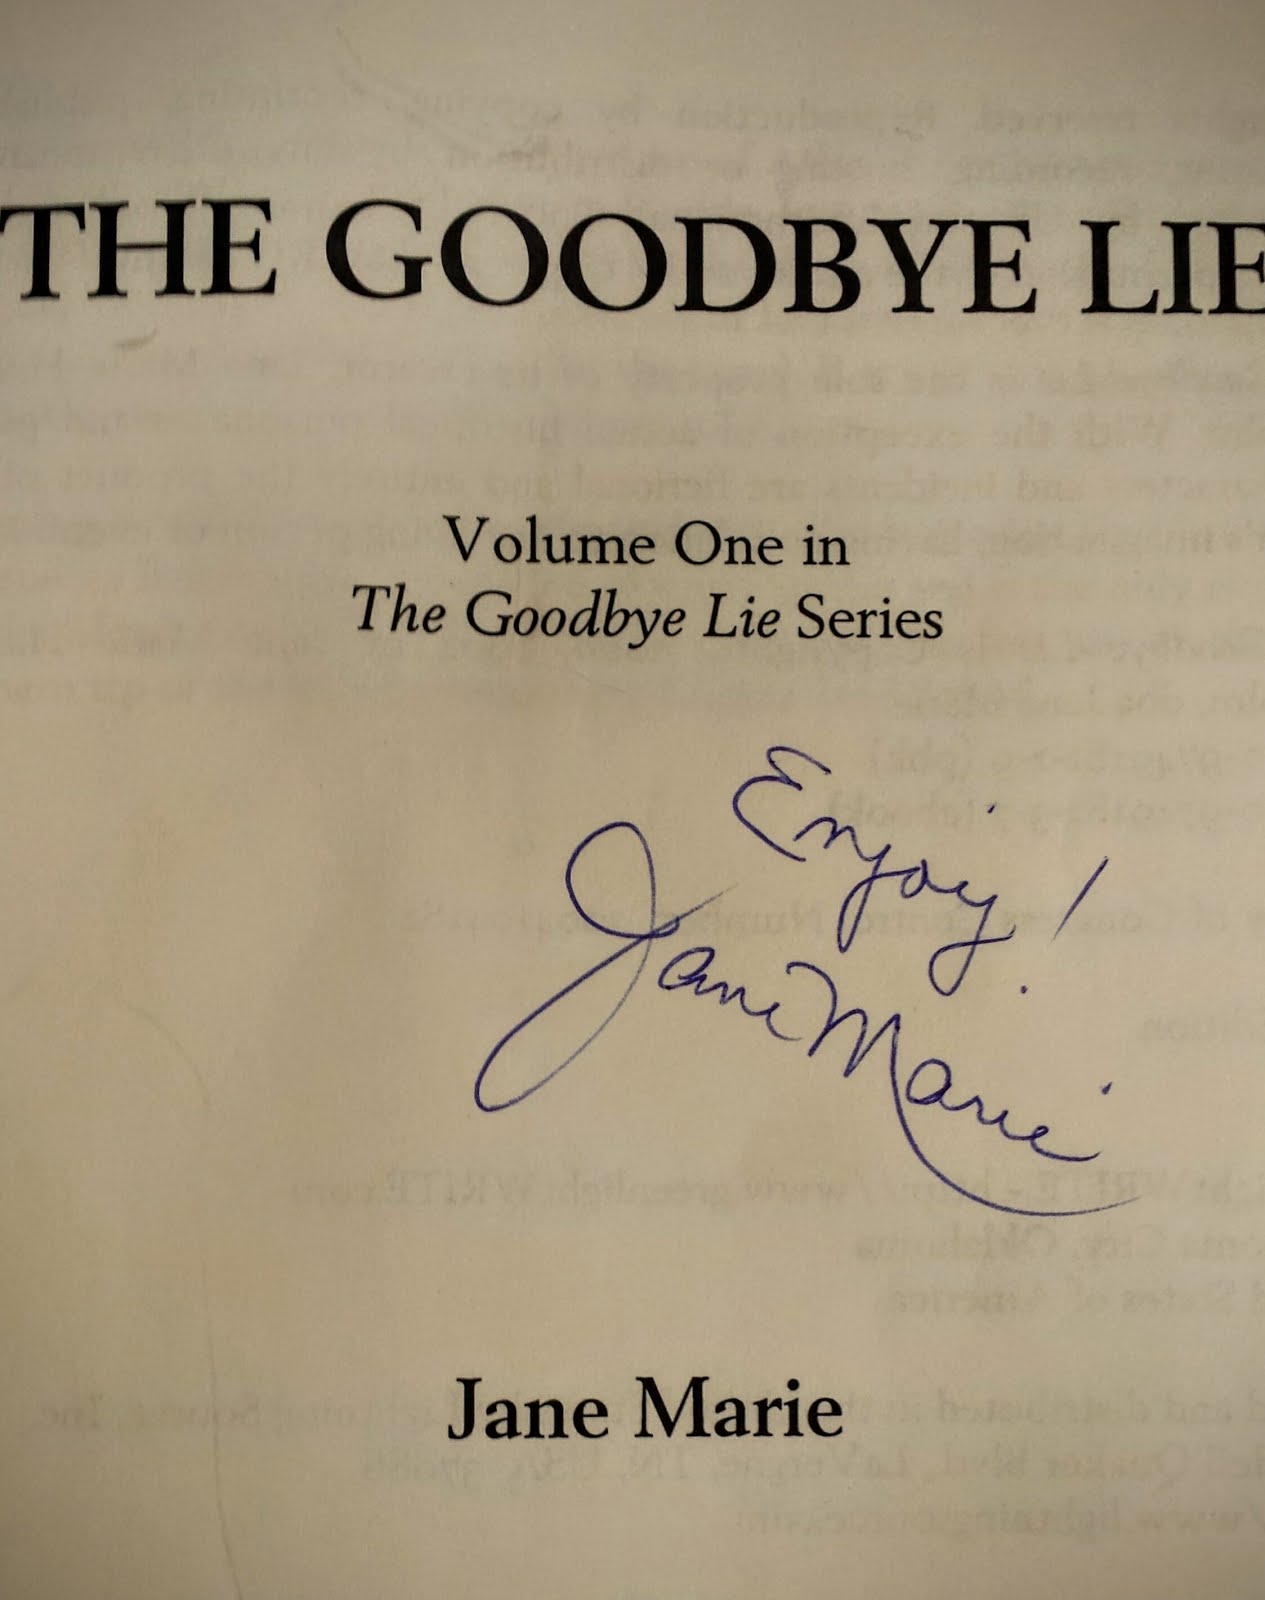 Click on the Title Page below to Read the Opening Pages of The Goodbye Lie